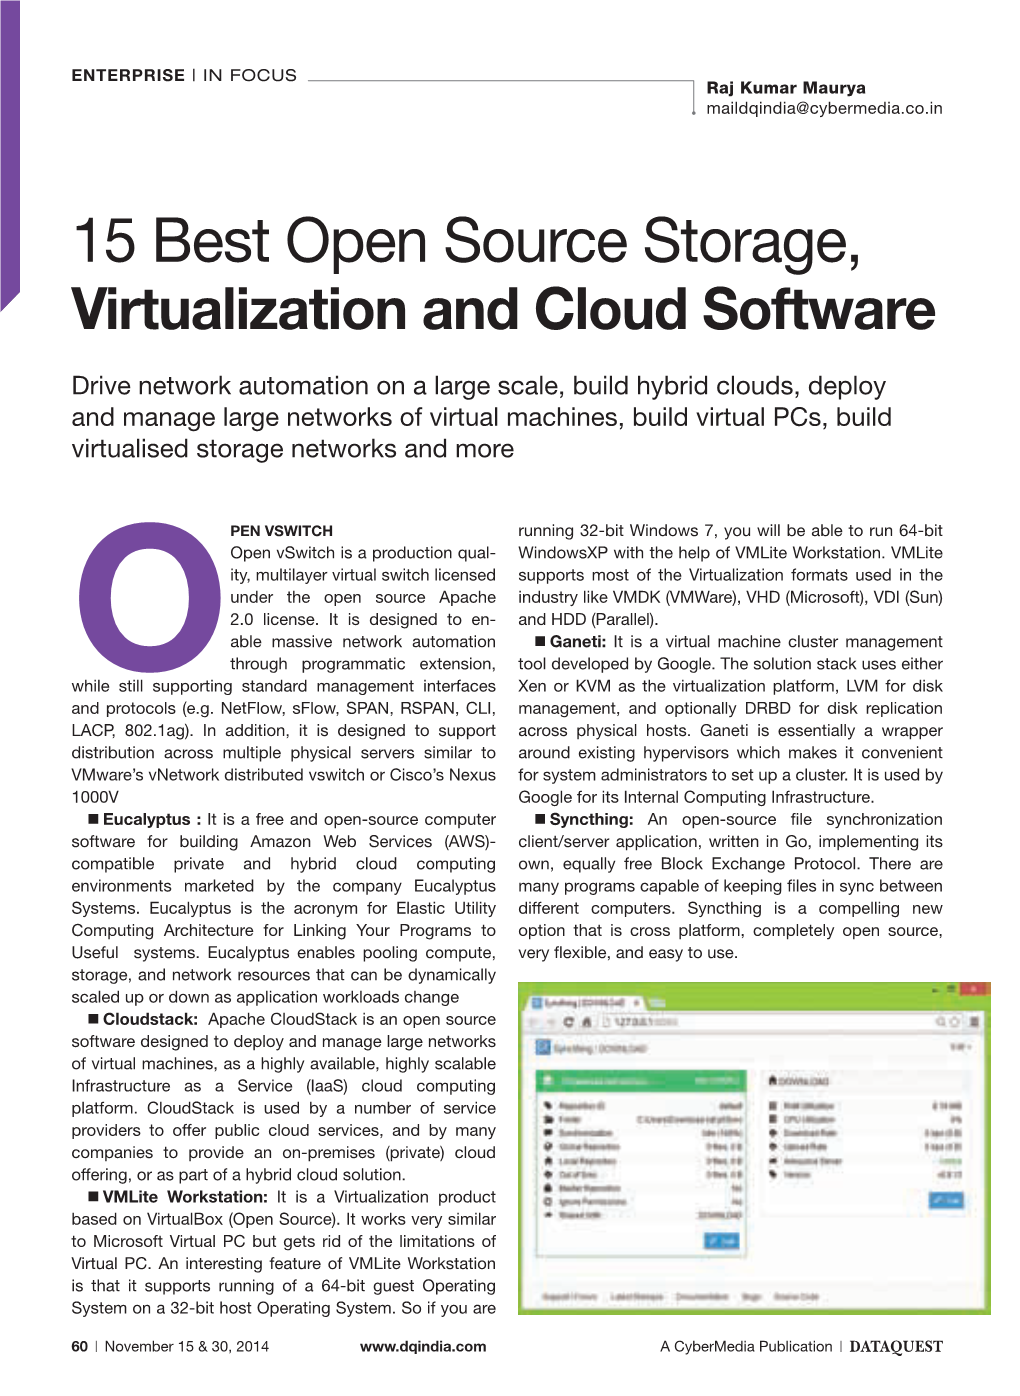 15 Best Open Source Storage, Virtualization and Cloud Software